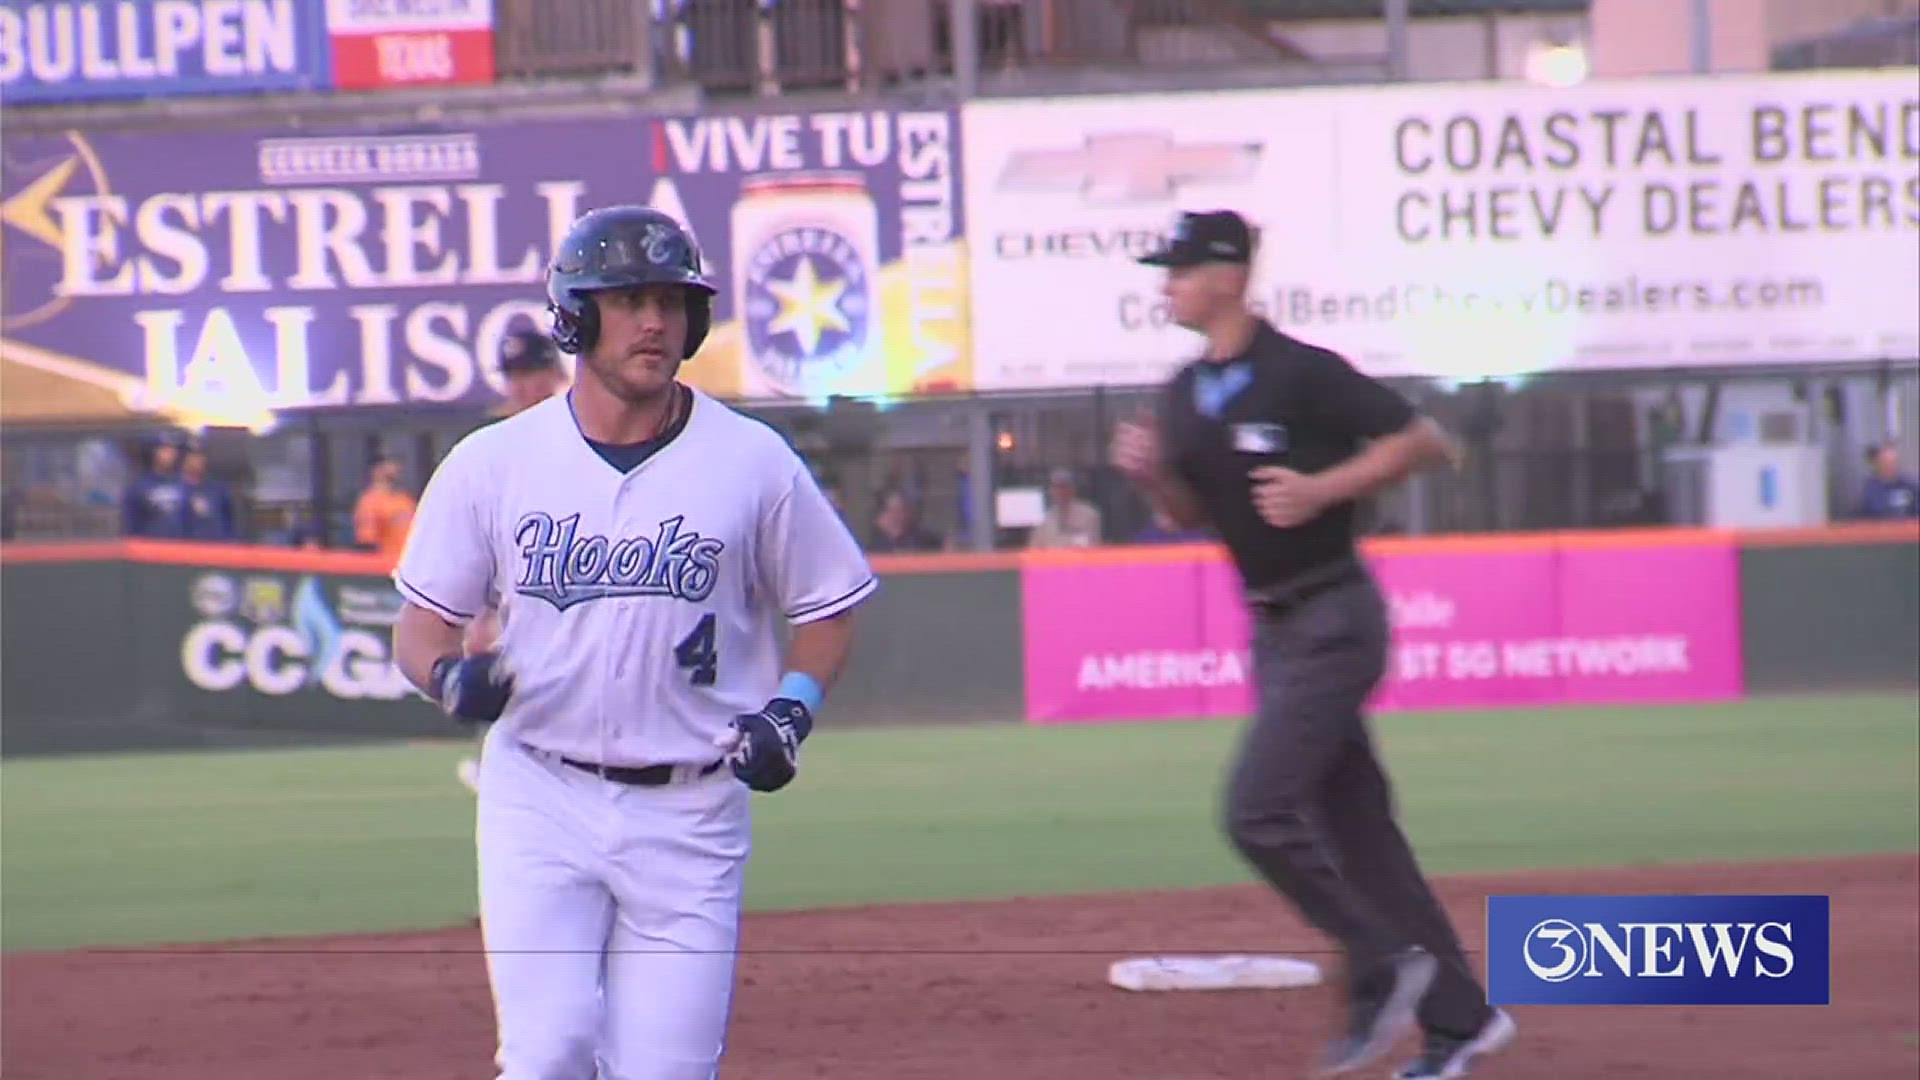 Corpus Christi got a two-run homer from Tommy Sacco Jr., but it wasn't enough in a 3-2 loss to the Rockhounds.